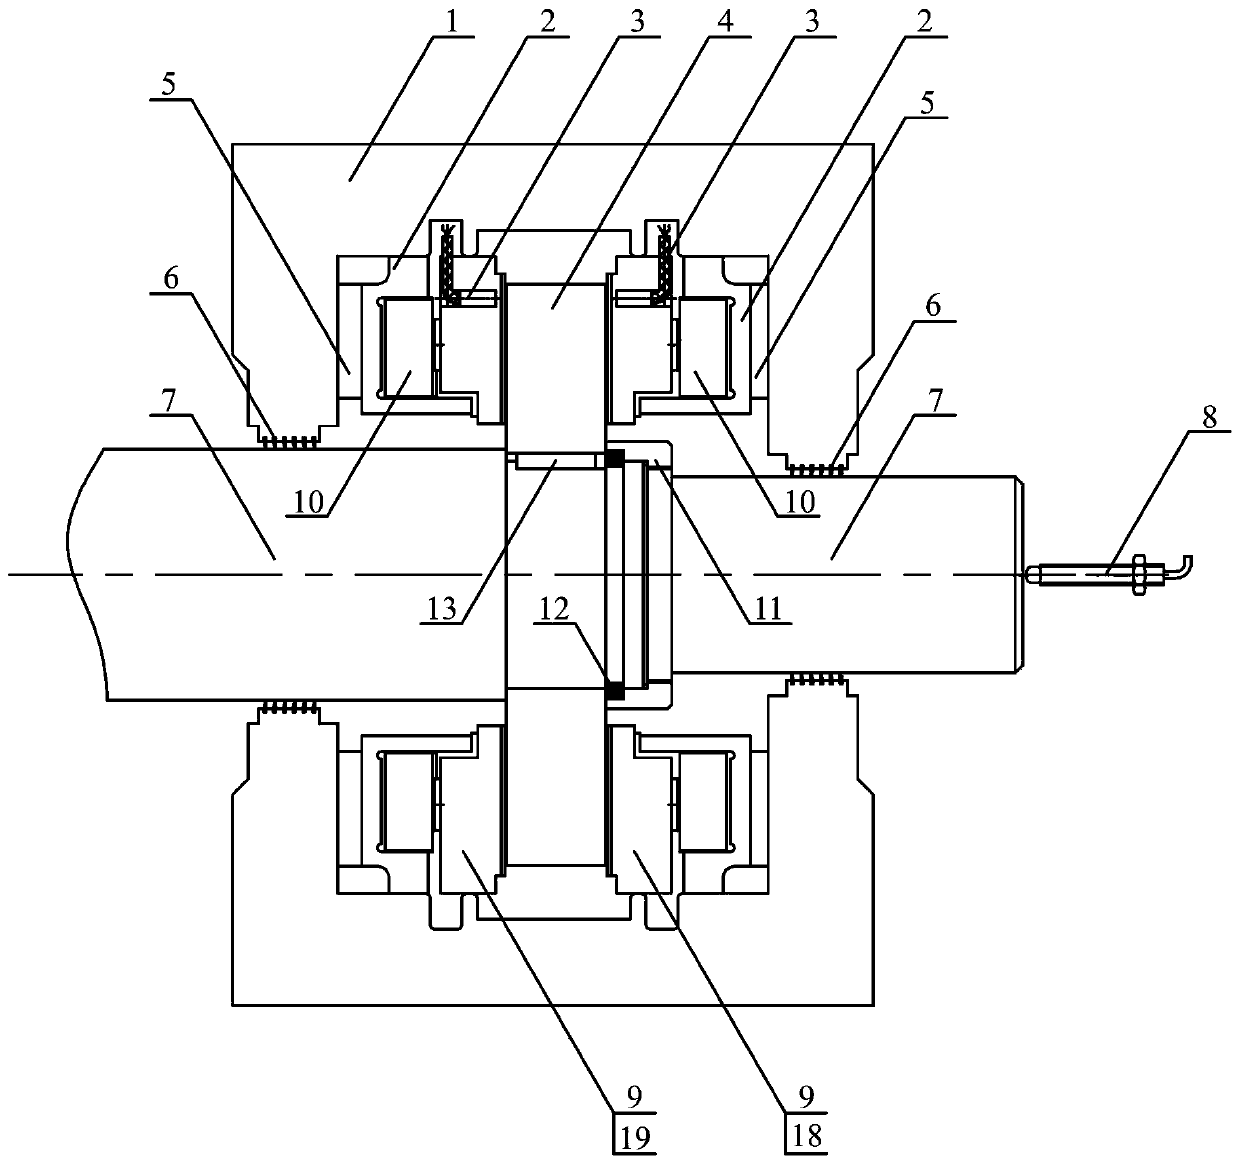 A shaft displacement fault self-healing control device for a centrifugal compressor